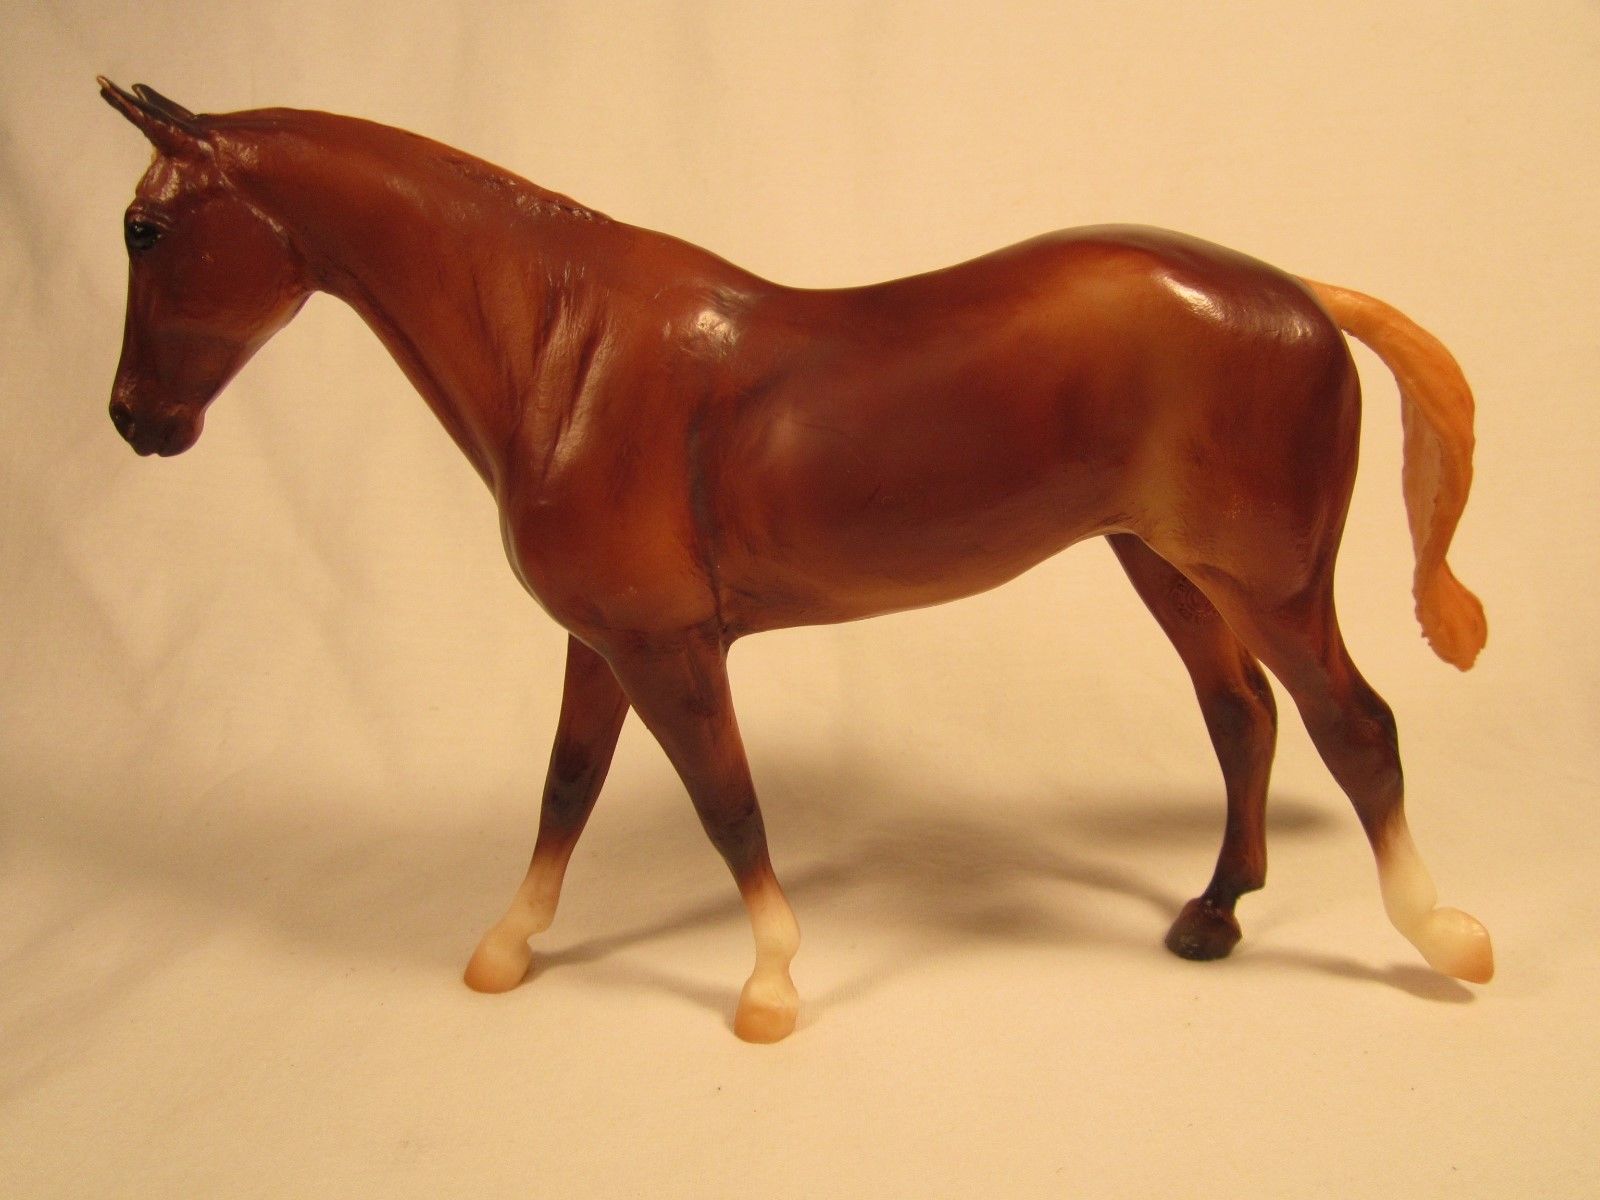 Primary image for BREYER MOLDING Classic Mold #3035MT MIGHT TANGO Model 61058 Chestnut [Z212q]